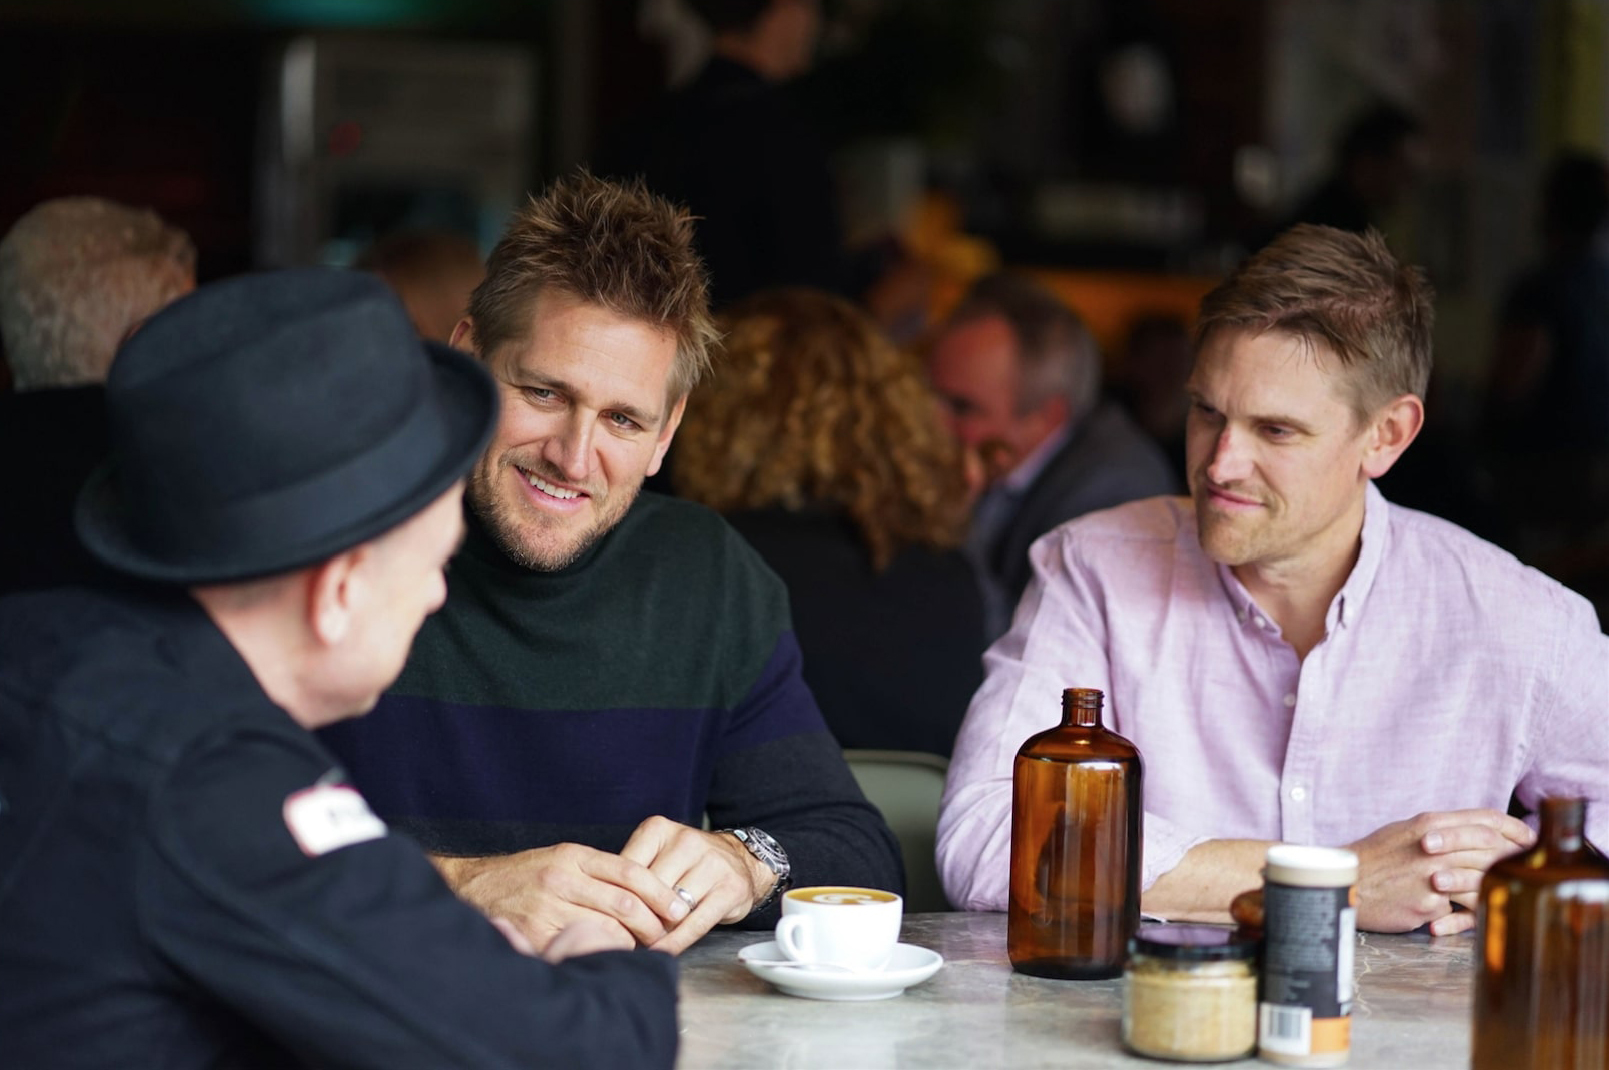 https://www.usmagazine.com/wp-content/uploads/2022/04/Curtis-Stone-Inside-a-Day-in-My-Life-8-AM.jpg?quality=86&strip=all